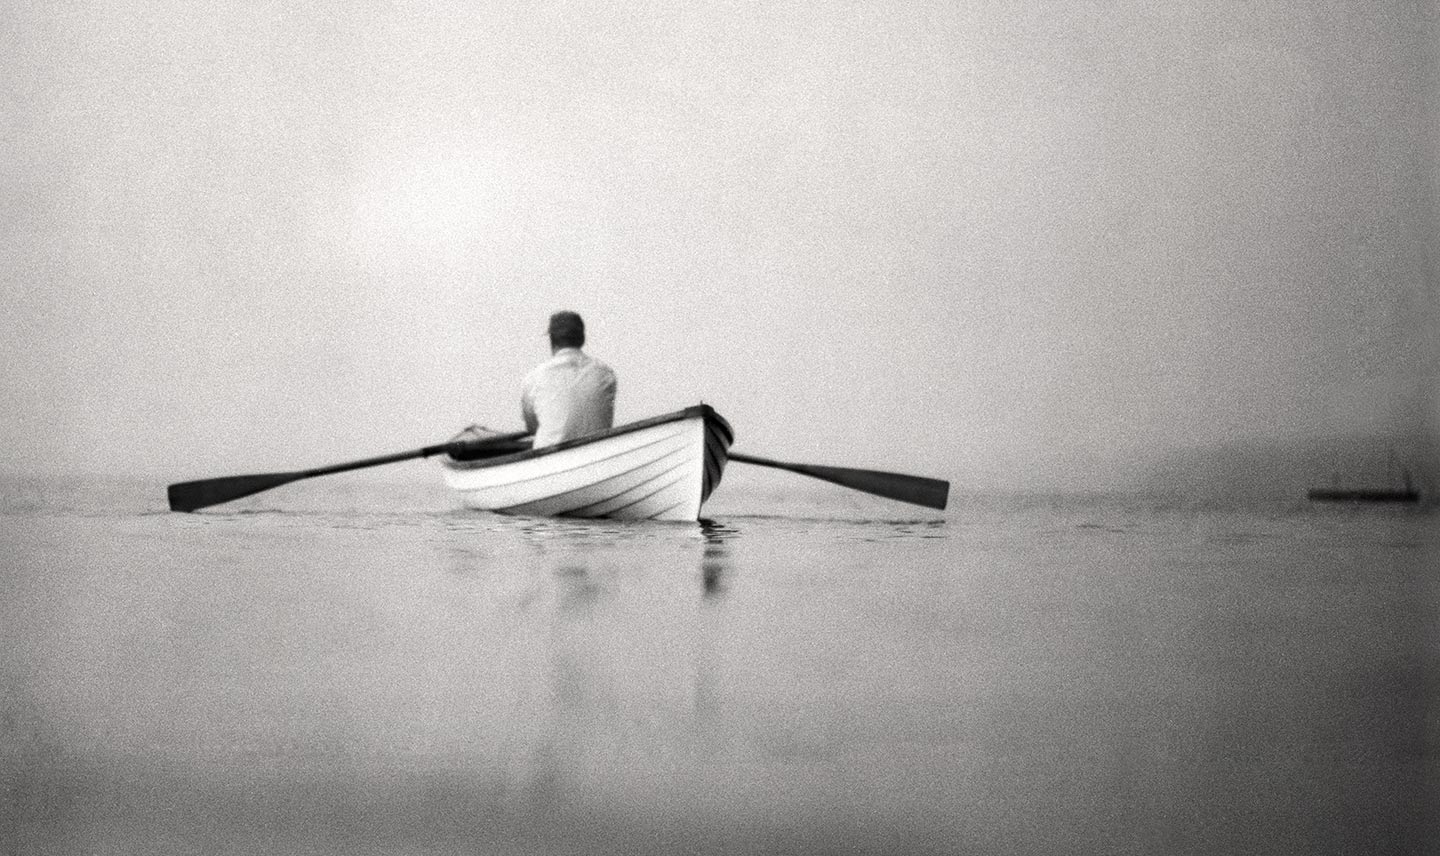 Black and White Image of Man Canoeing